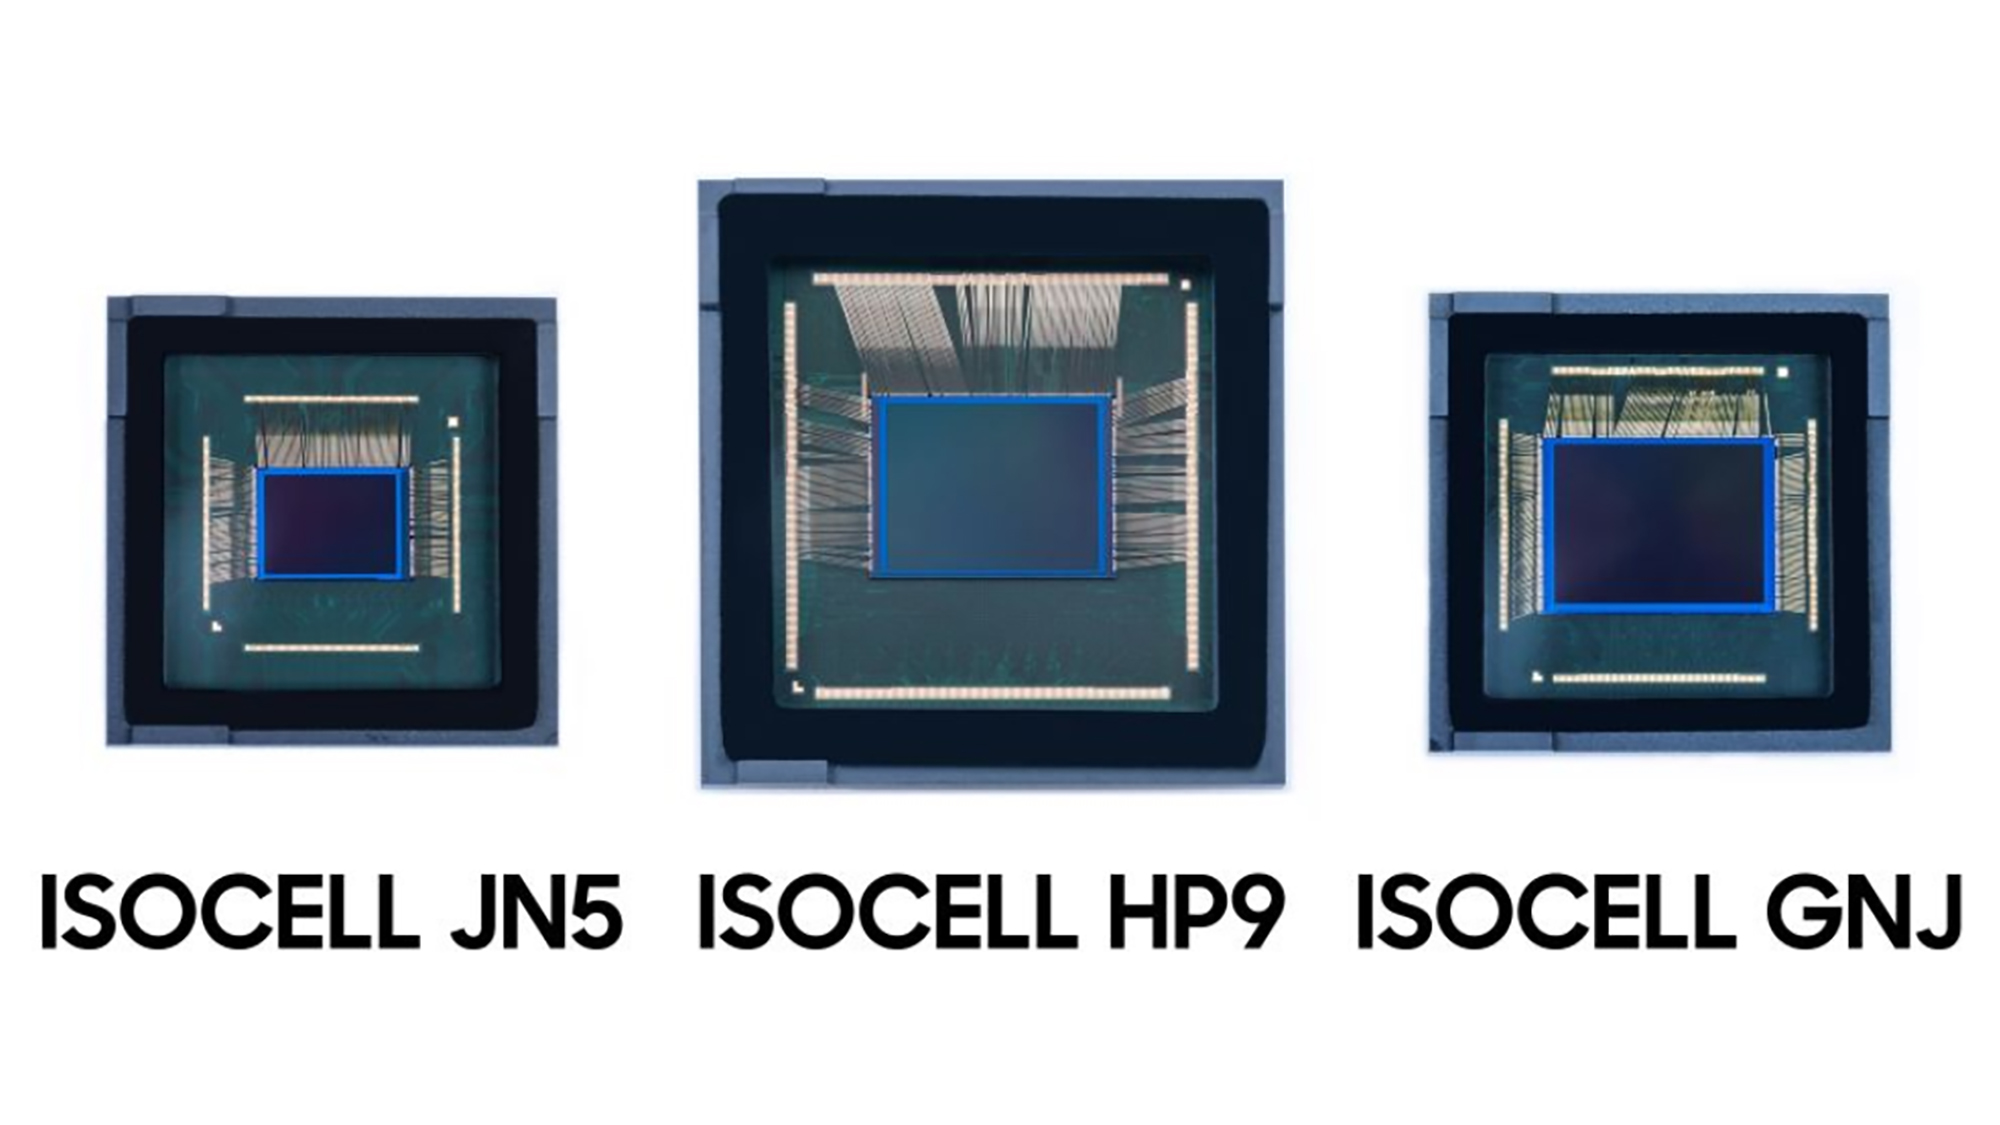 Objectifs d'appareil photo Samsung ISOCELL H9, ISOCELL JN5, ISOCELL GNJ